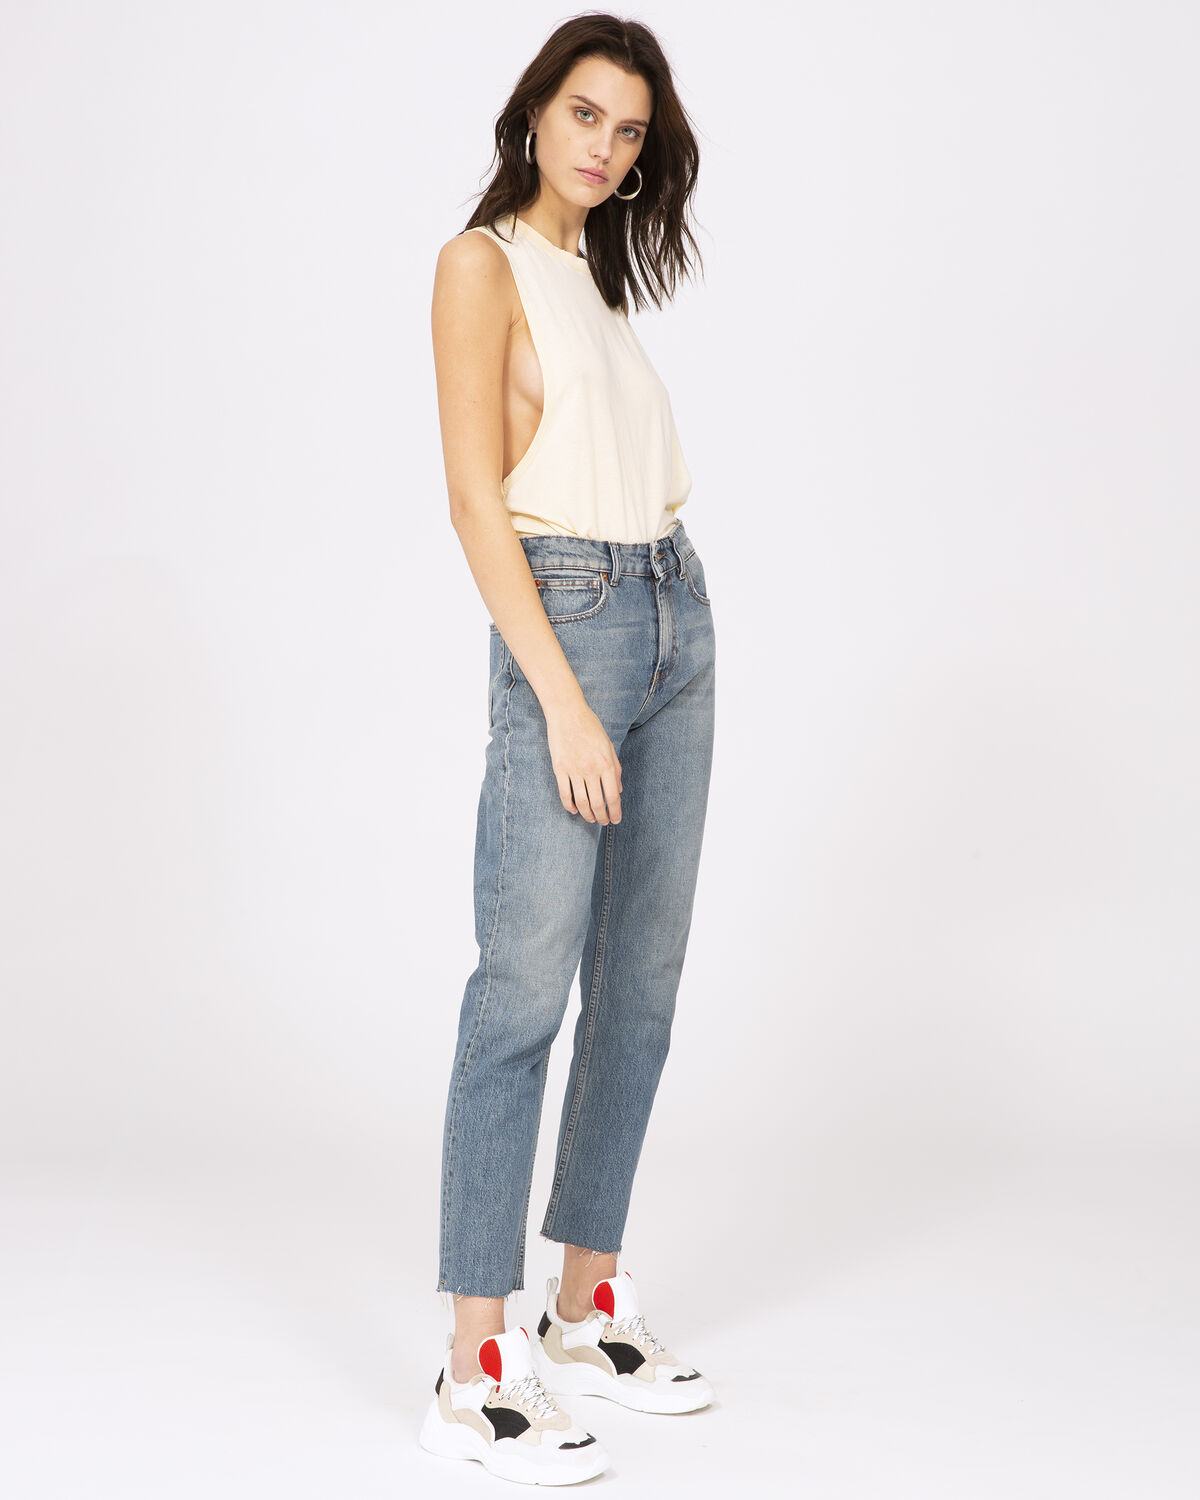 Photo of IRO Paris Chary Jeans Blue And Grey - These Regular Jeans Are An Essential Part Of The Wardrobe With Their Sharp, Slightly Frayed Edges. Combine Them With A Pair Of Pumps For A Beautifully Slim Silhouette. Spring Summer 19